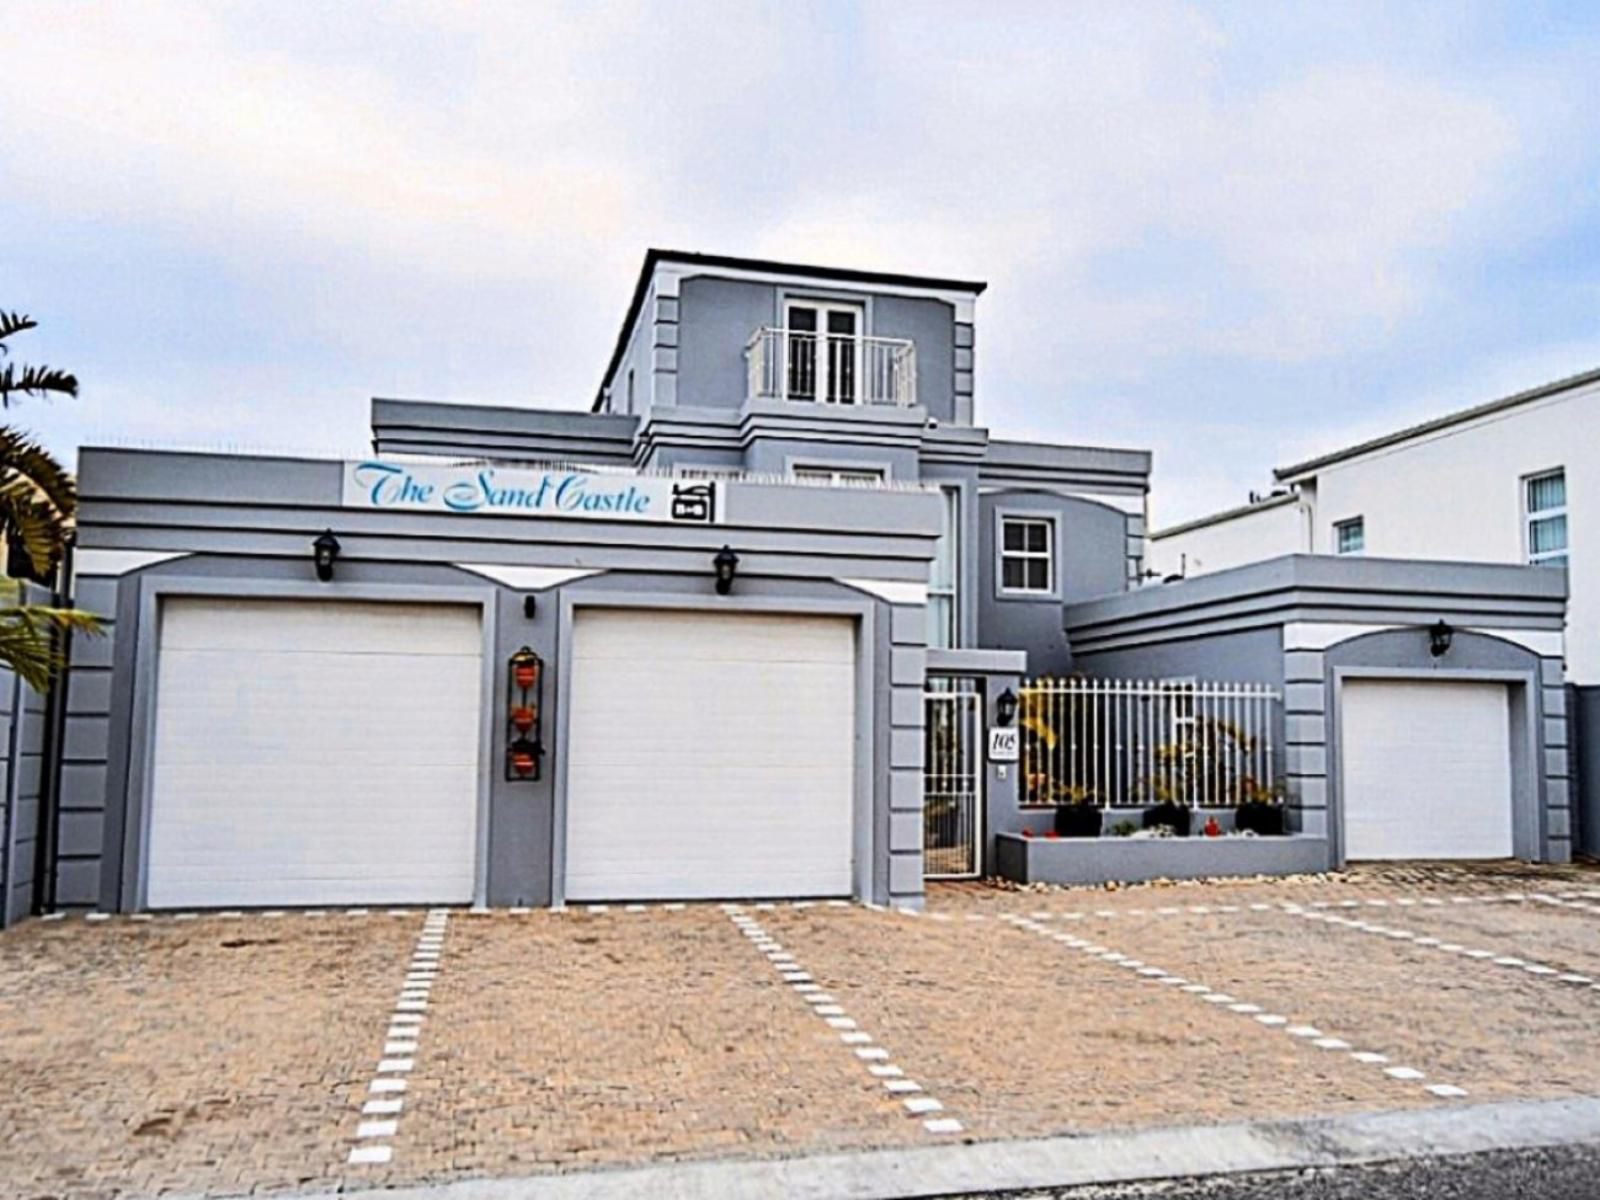 Sandcastle Bandb Melkbosstrand Cape Town Western Cape South Africa House, Building, Architecture, Shipping Container